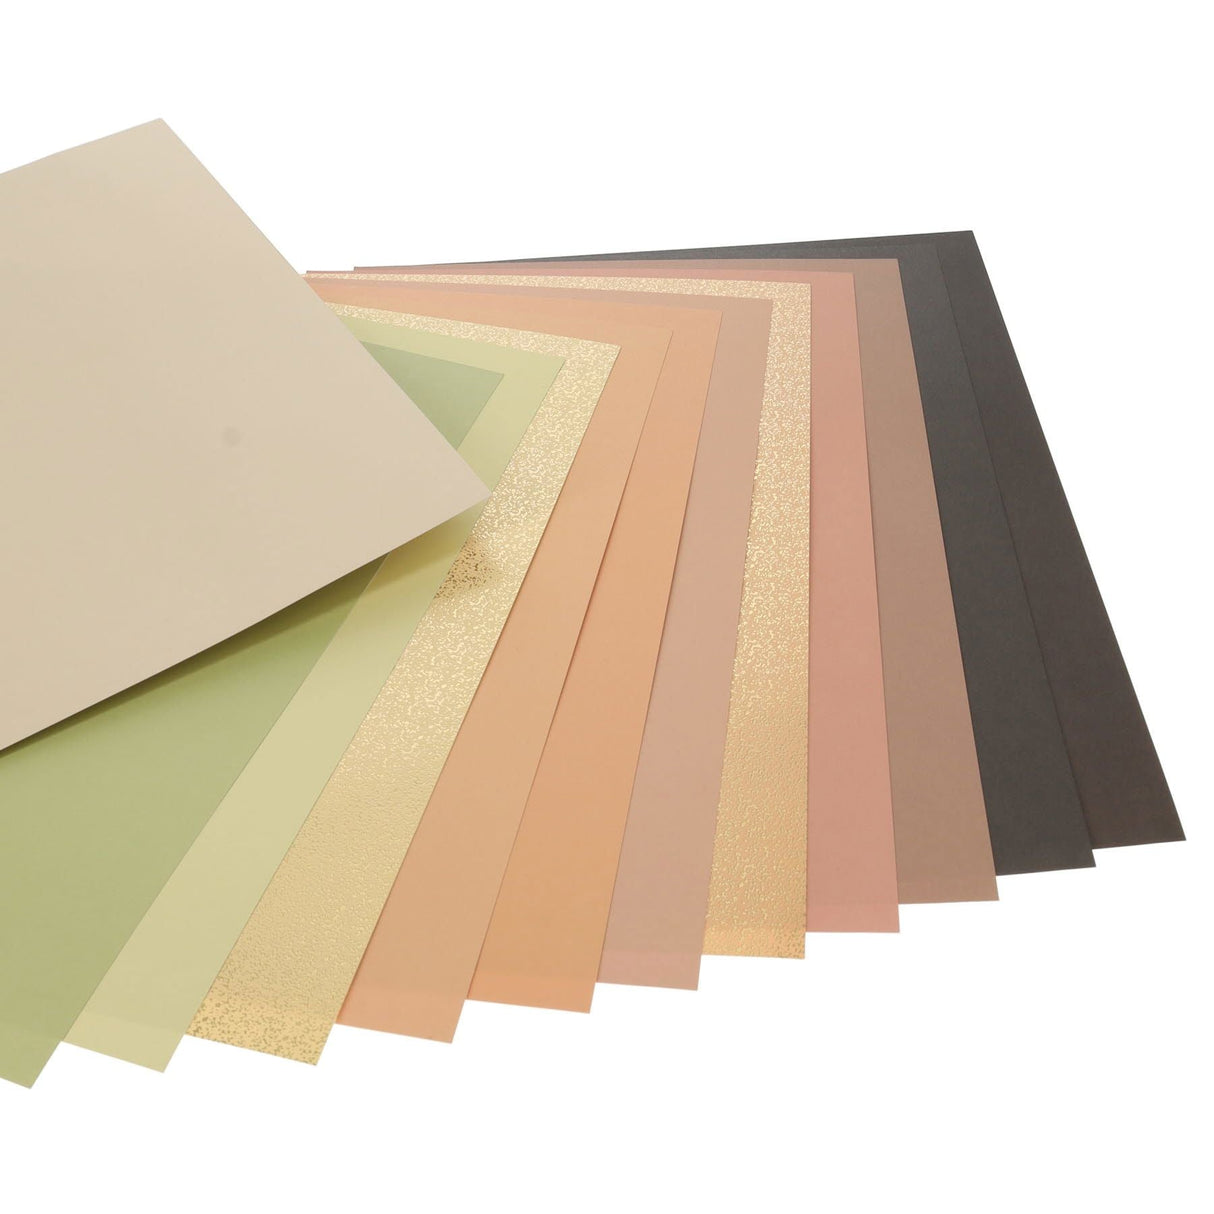 Premier Activity A4 Paper Pad - 24 Sheets - 180gsm - Shades of Gold | Stationery Shop UK